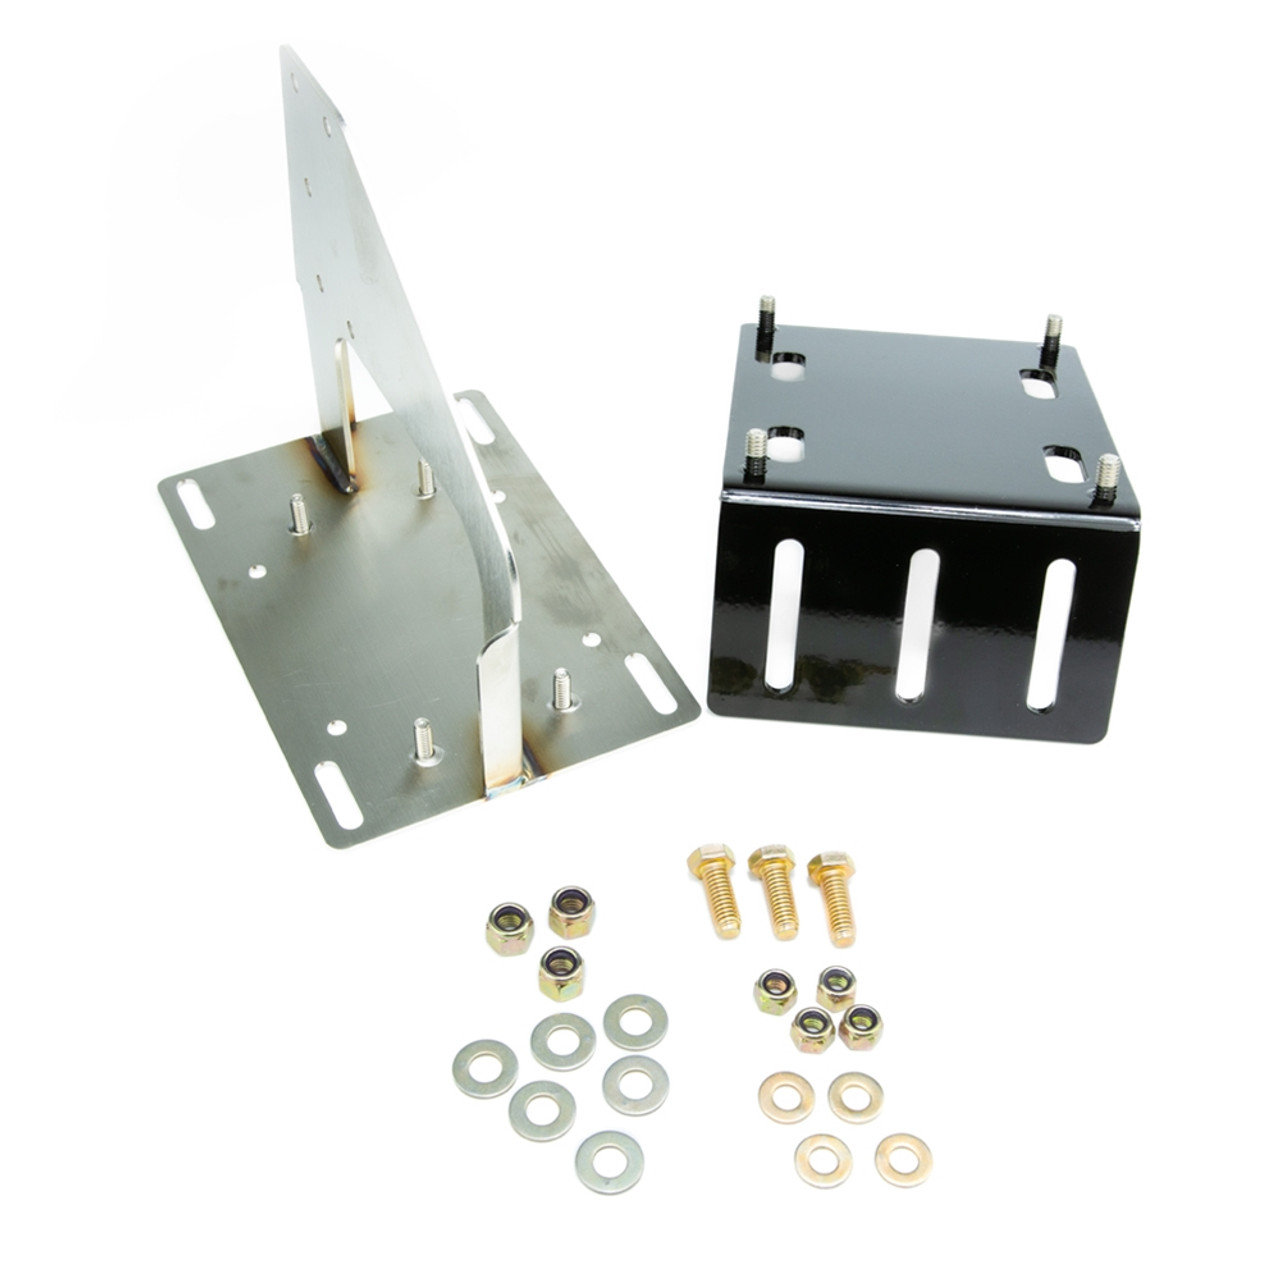  Driven Diesel SD High Volume Fuel Delivery Kit (DUAL BOSCH : 5/8 PICKUP) for 1999 to 2007 Ford 7.3/6.0L Powerstroke (DD-SD-HVFDK-2P-58-V2) Bracket View